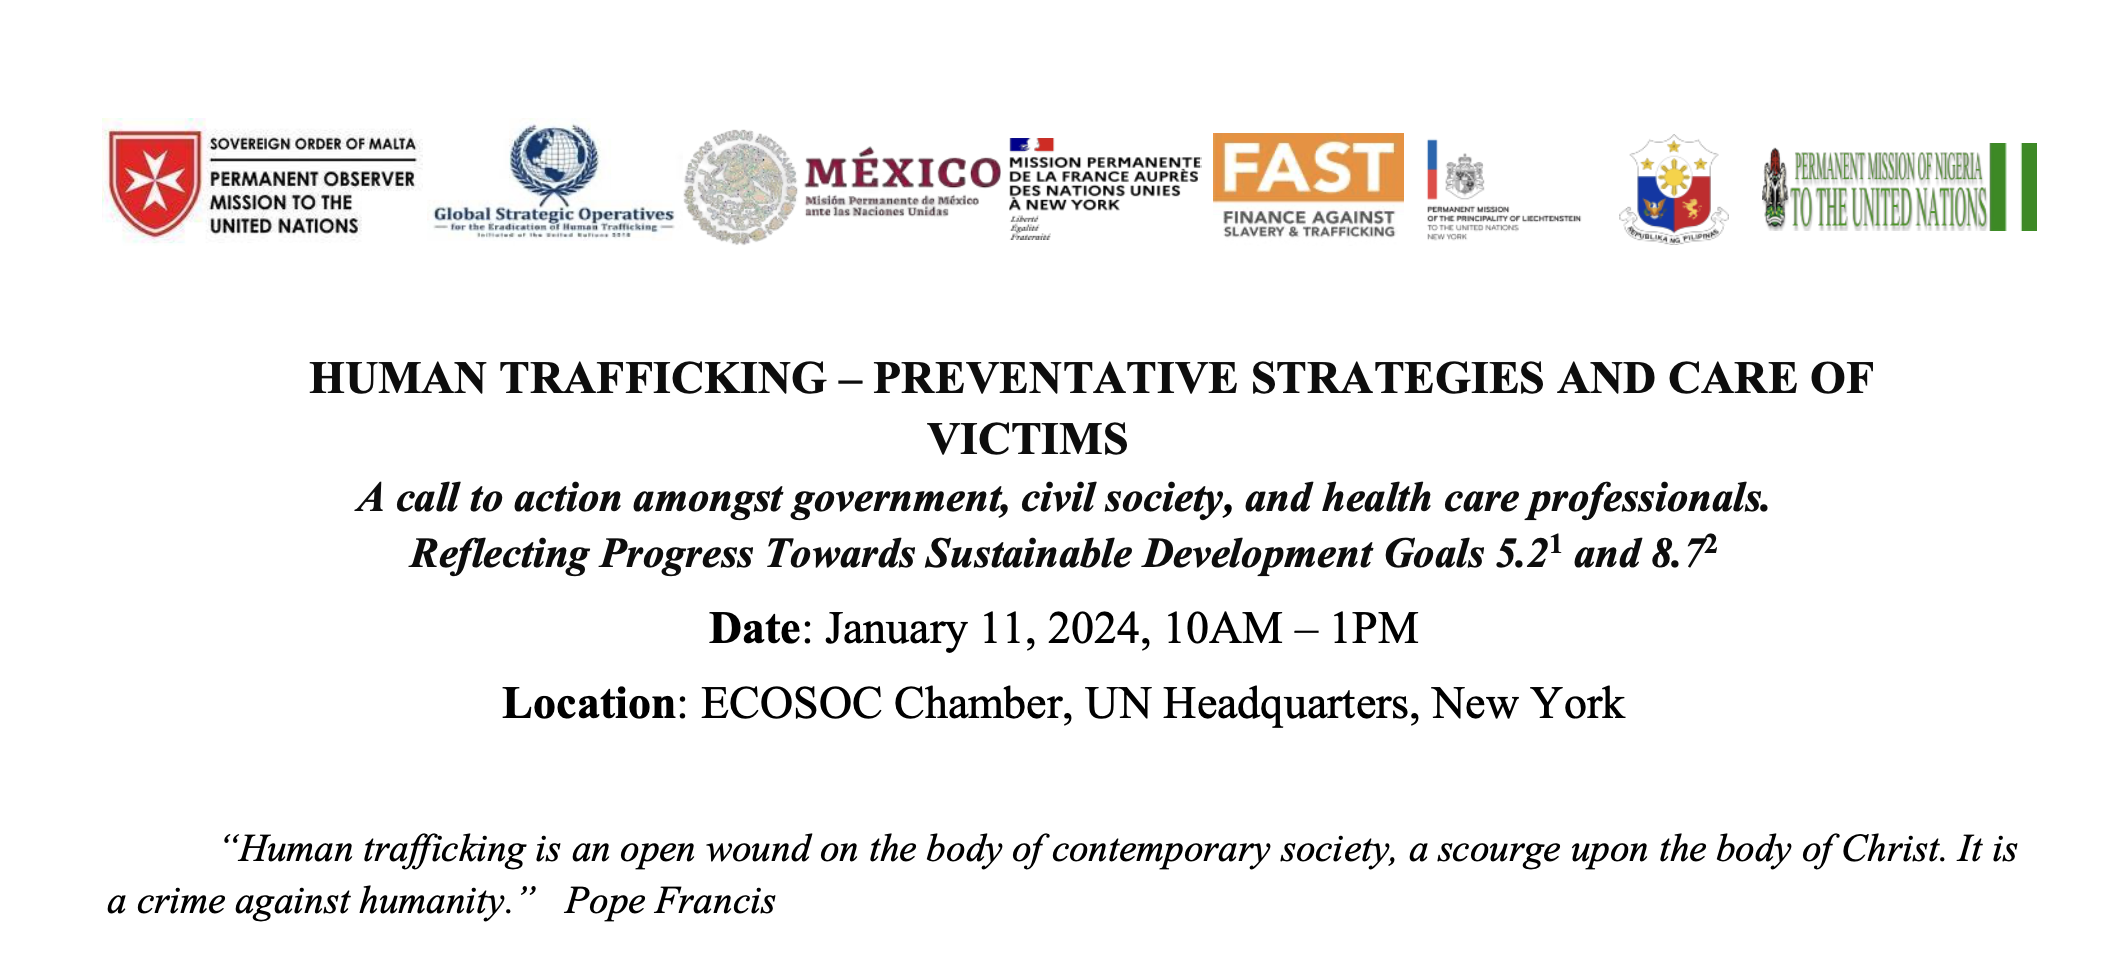 HUMAN TRAFFICKING – PREVENTATIVE STRATEGIES AND CARE OF VICTIMS